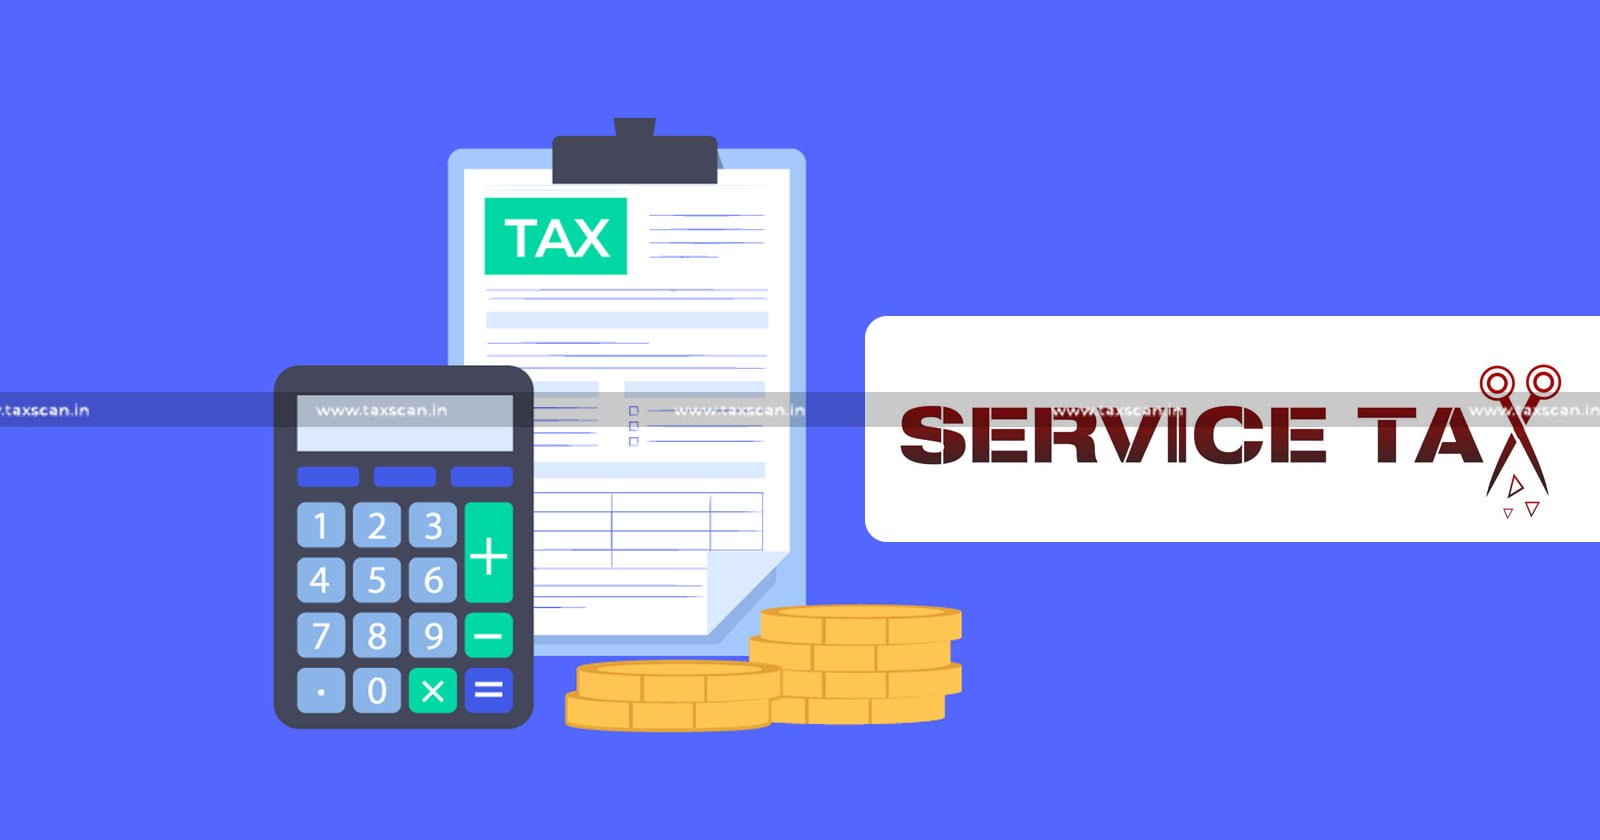 Service Tax - Service Tax on Value of Sale of Books - Sale of Books - Audited Financial Statement - Financial Statement - Value of Sale of Books Separately Identifiable from Audited Financial Statement - taxscan